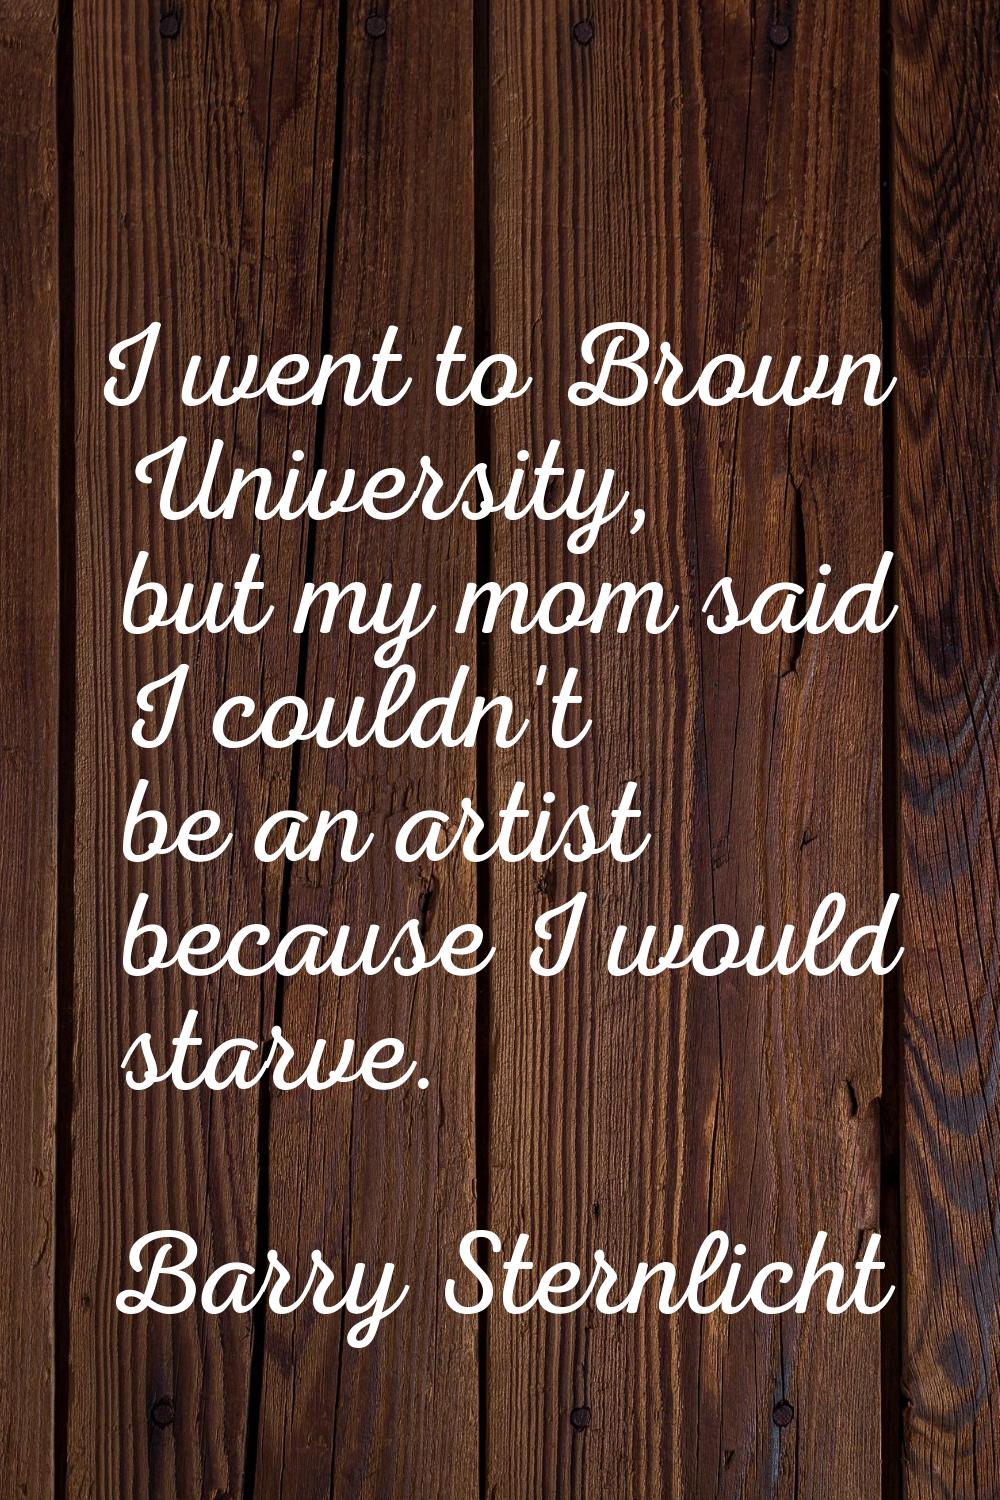 I went to Brown University, but my mom said I couldn't be an artist because I would starve.